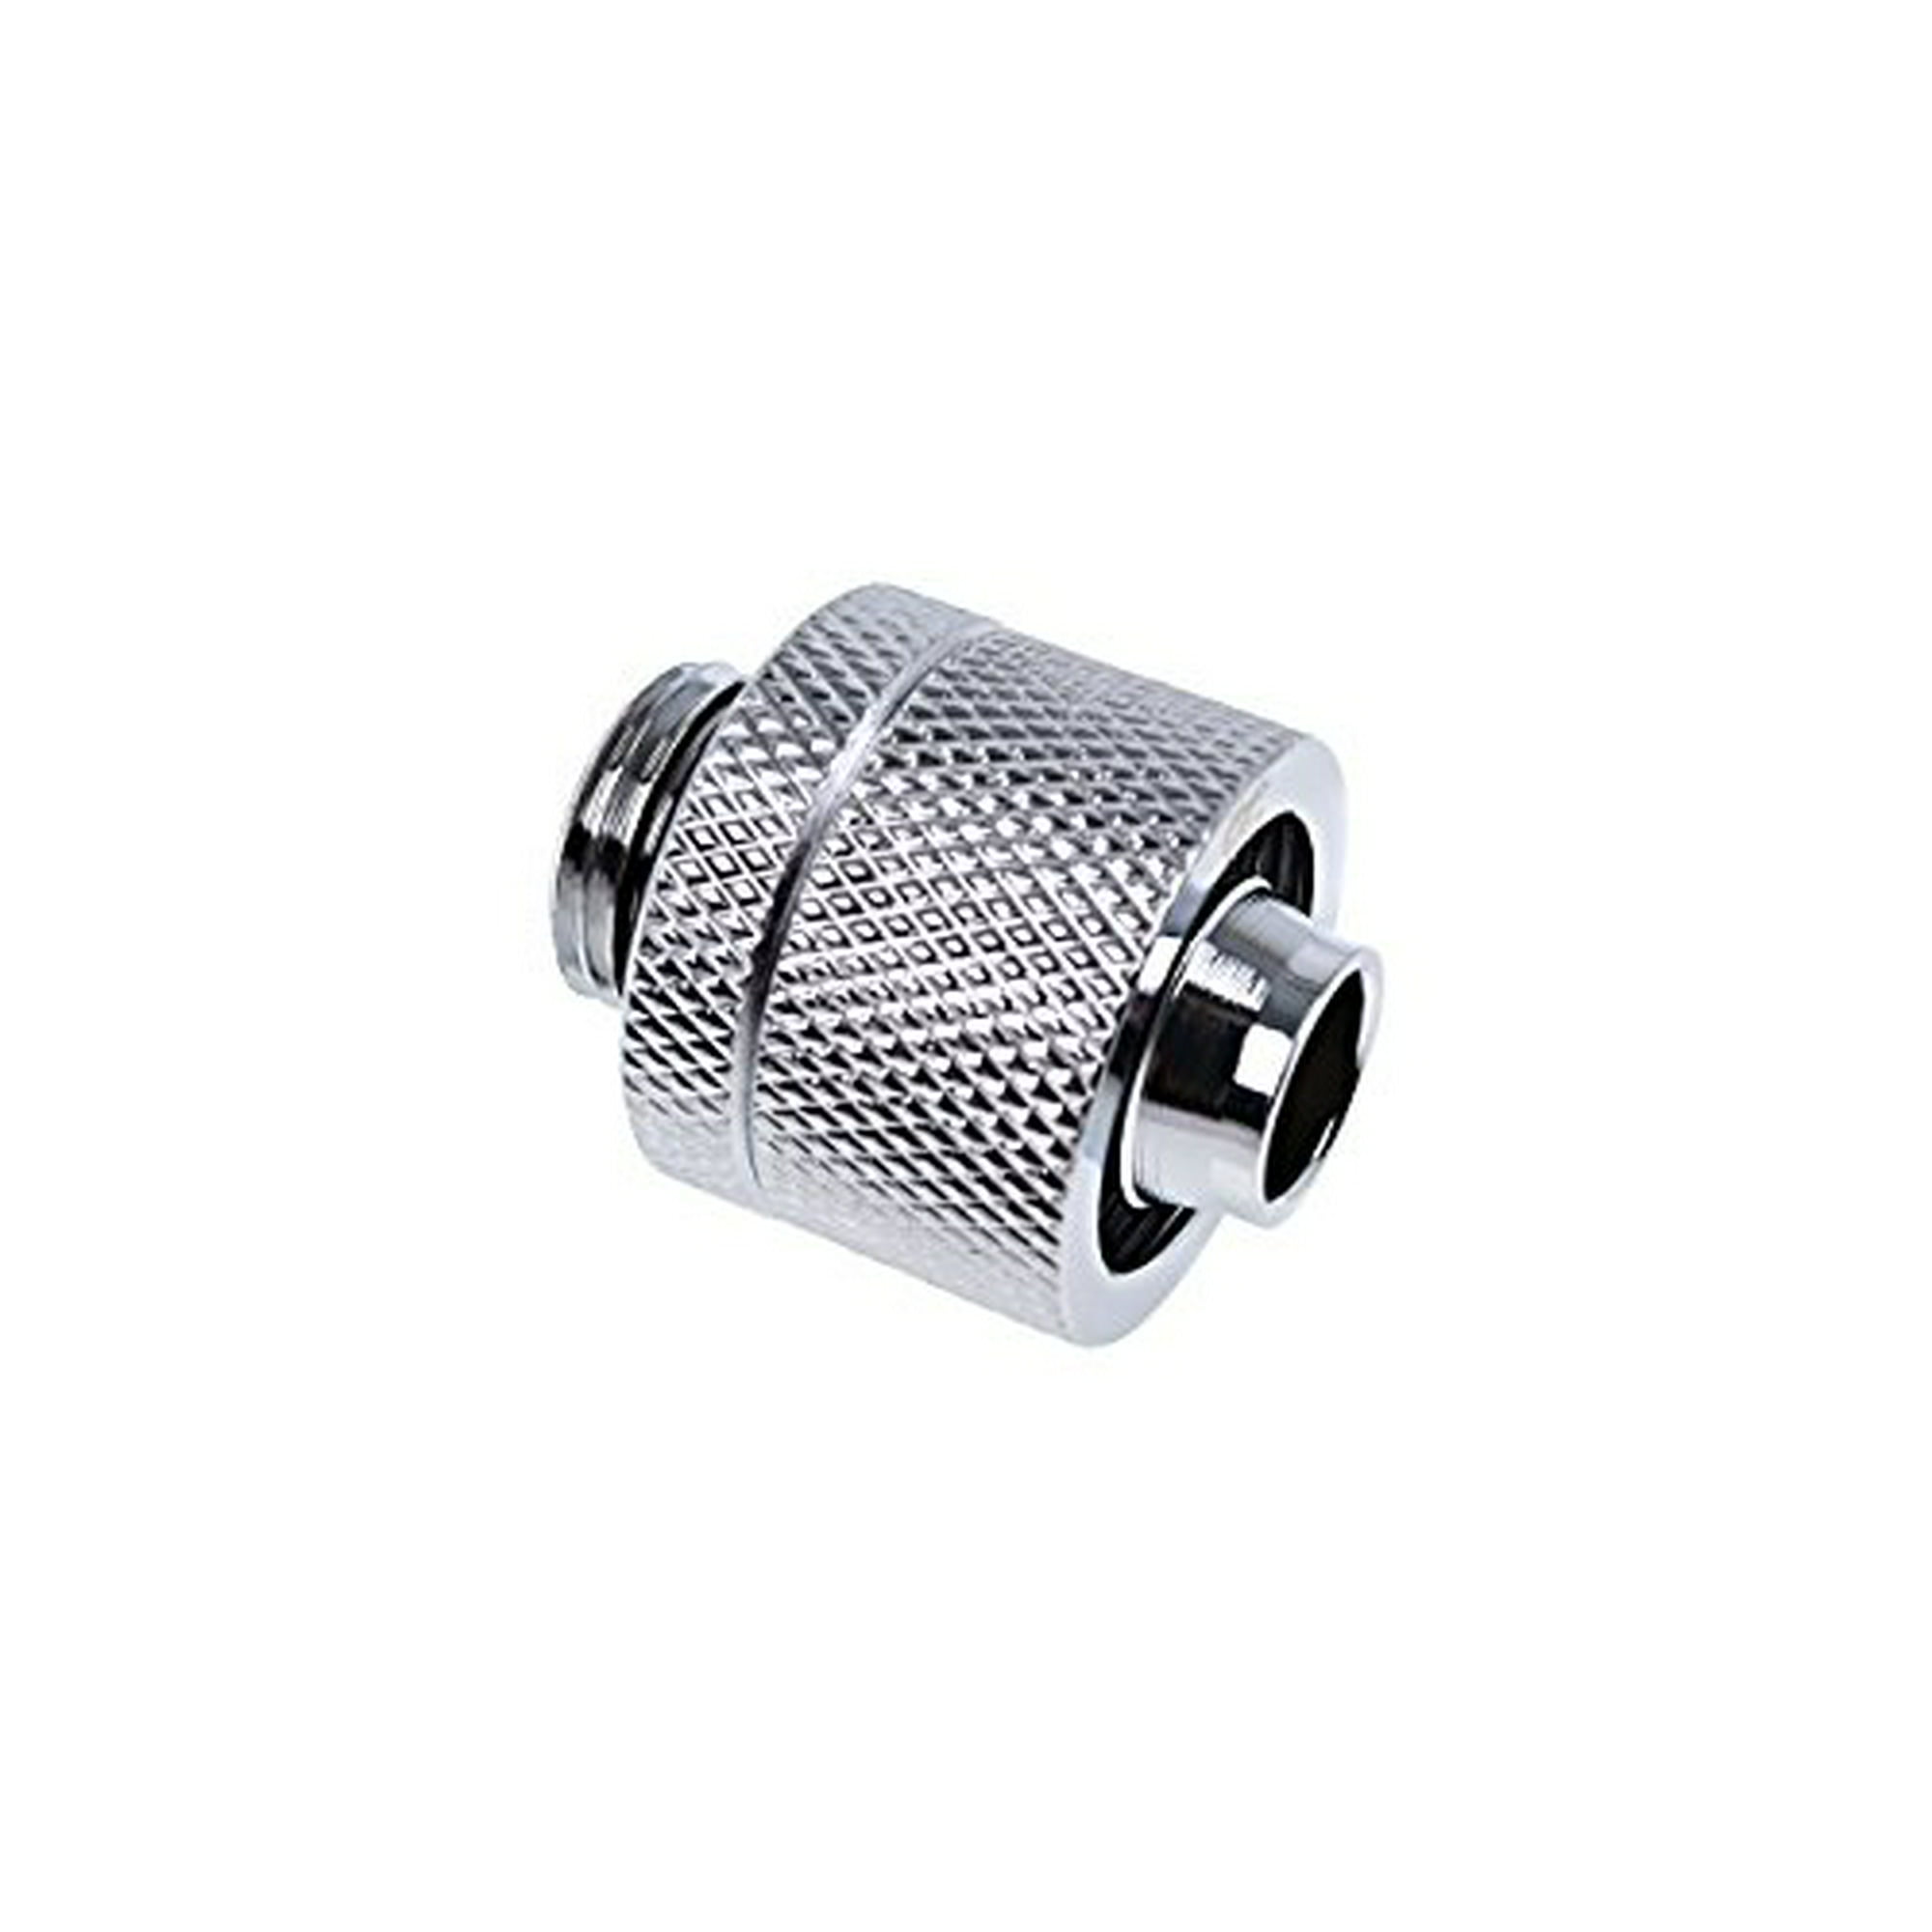 Alphacool 17235Silver Hardware Cooling Accessory Hardware Cooling Accessory  (22mm, 27mm, 22mm, 100g